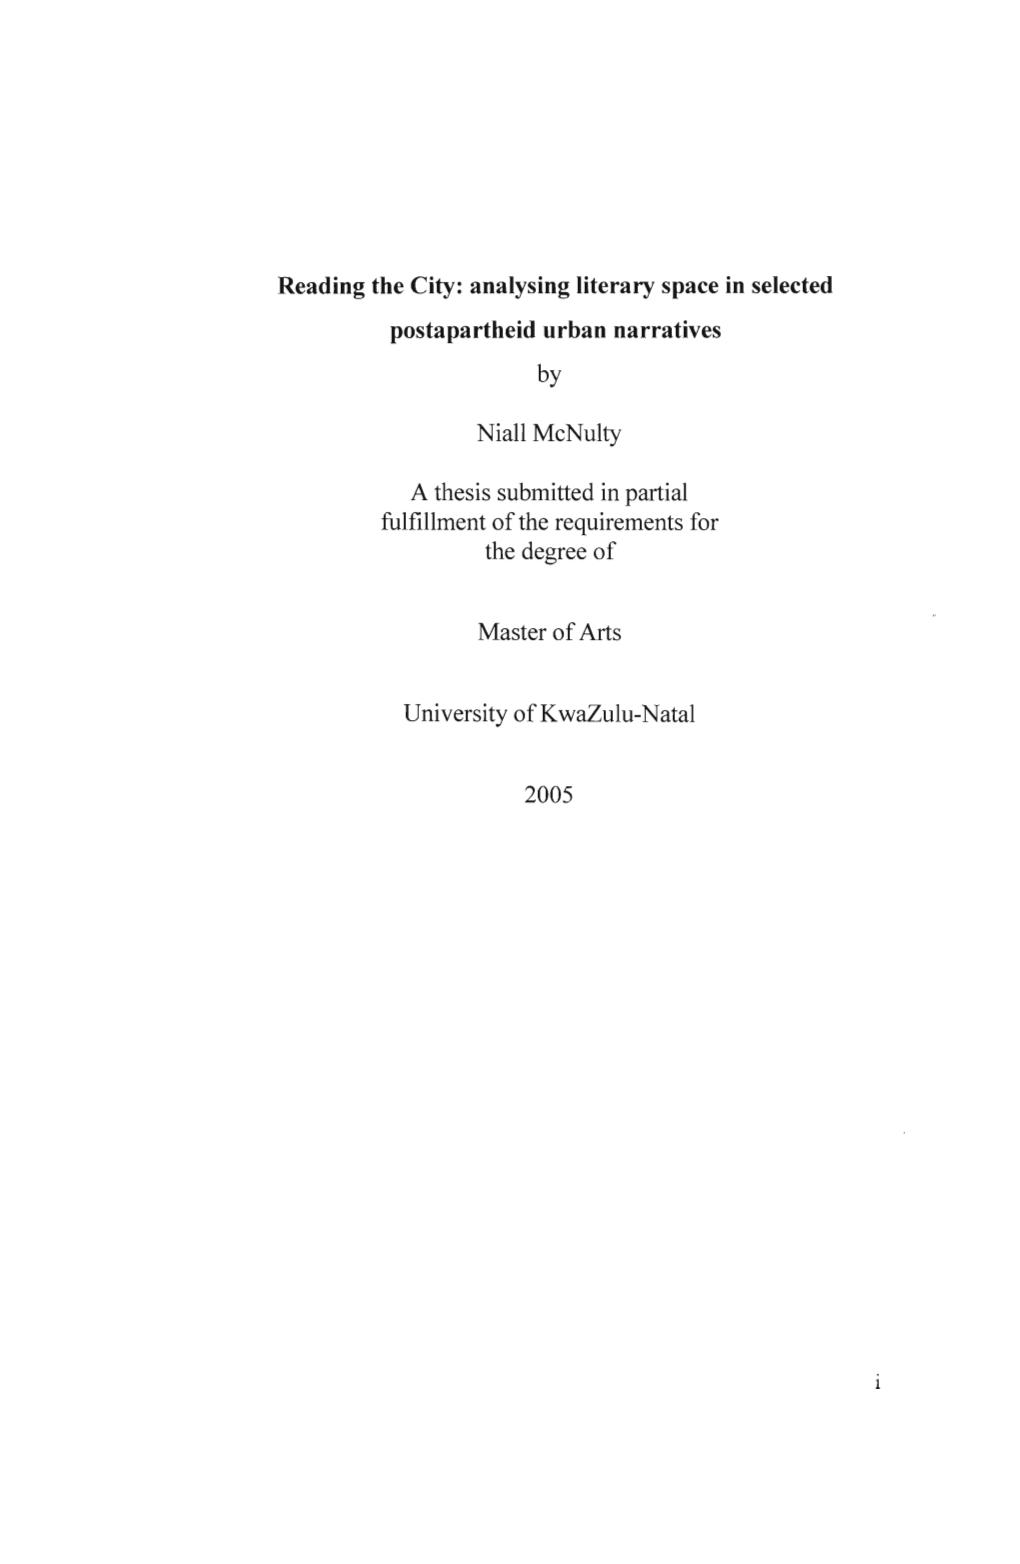 Reading the City: Analysing Literary Space in Selected Postapartheid Urban Narratives by Niall Mcnulty a Thesis Submitted In